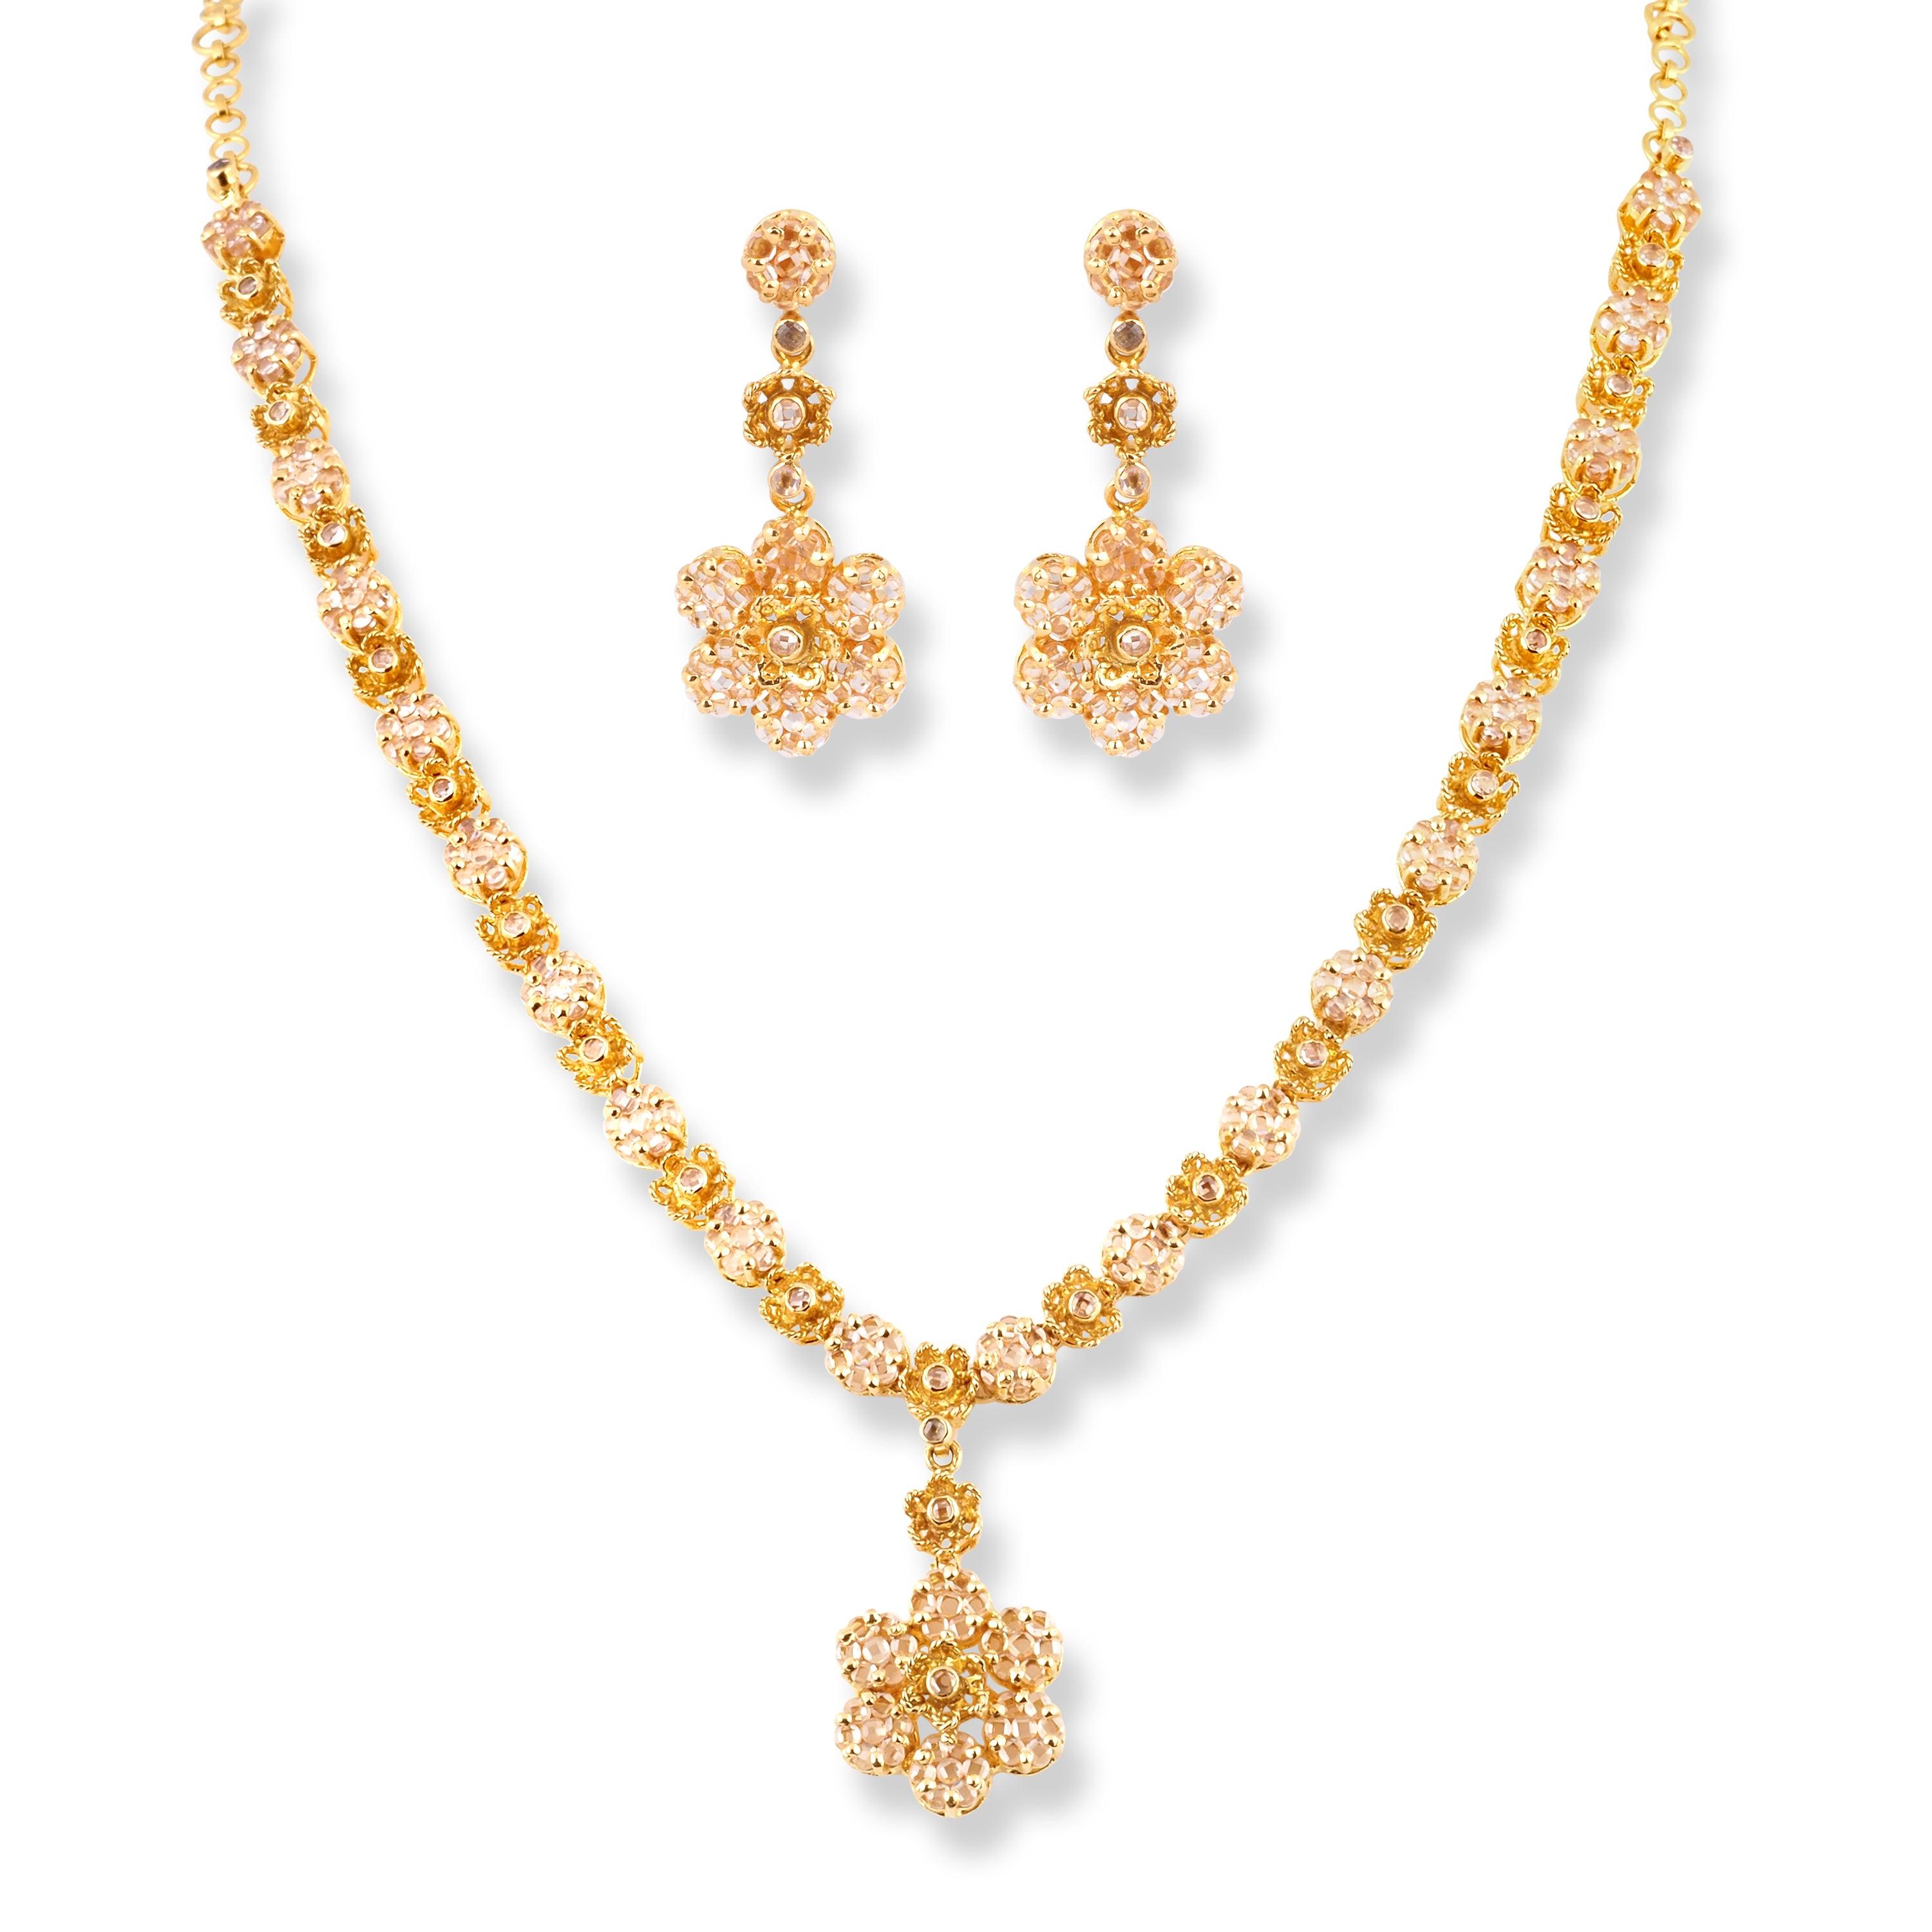 22ct Yellow Gold Necklace & Earrings with Polki Style Cubic Zirconias NE-7058 - Minar Jewellers